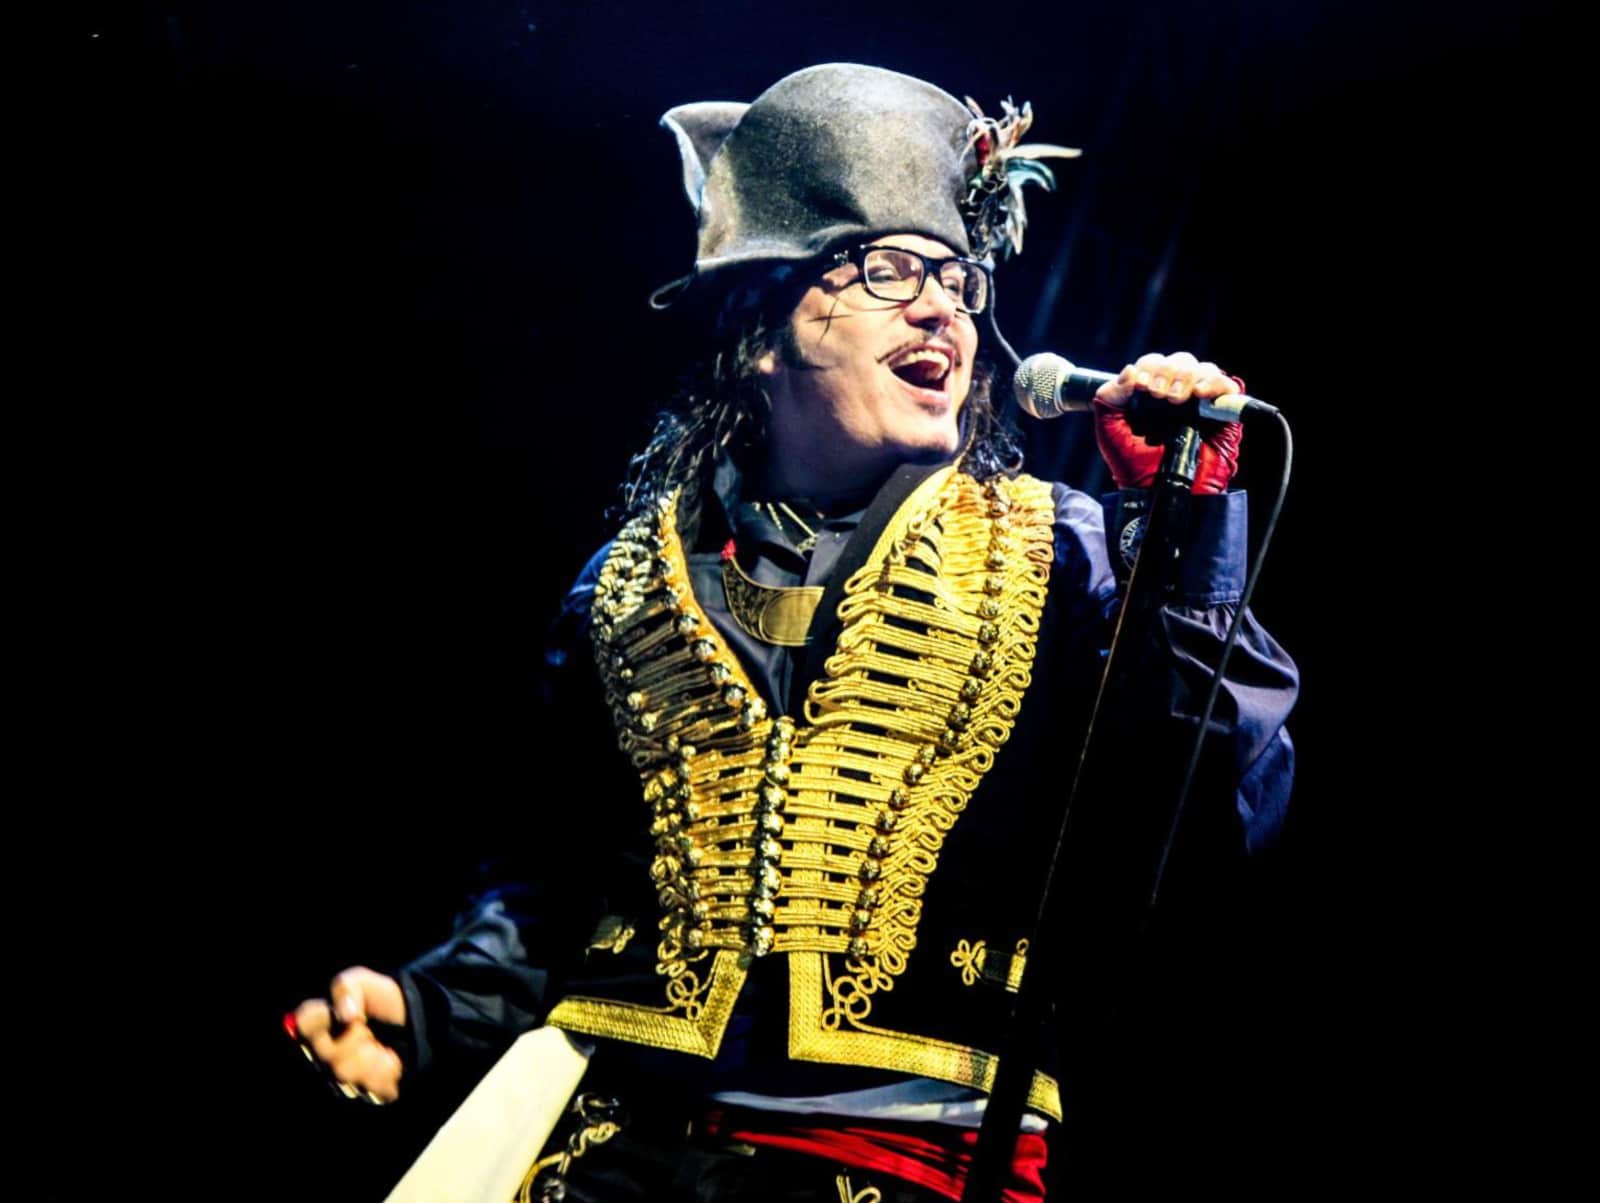 Adam Ant at Glasgow Royal Concert Hall Tickets